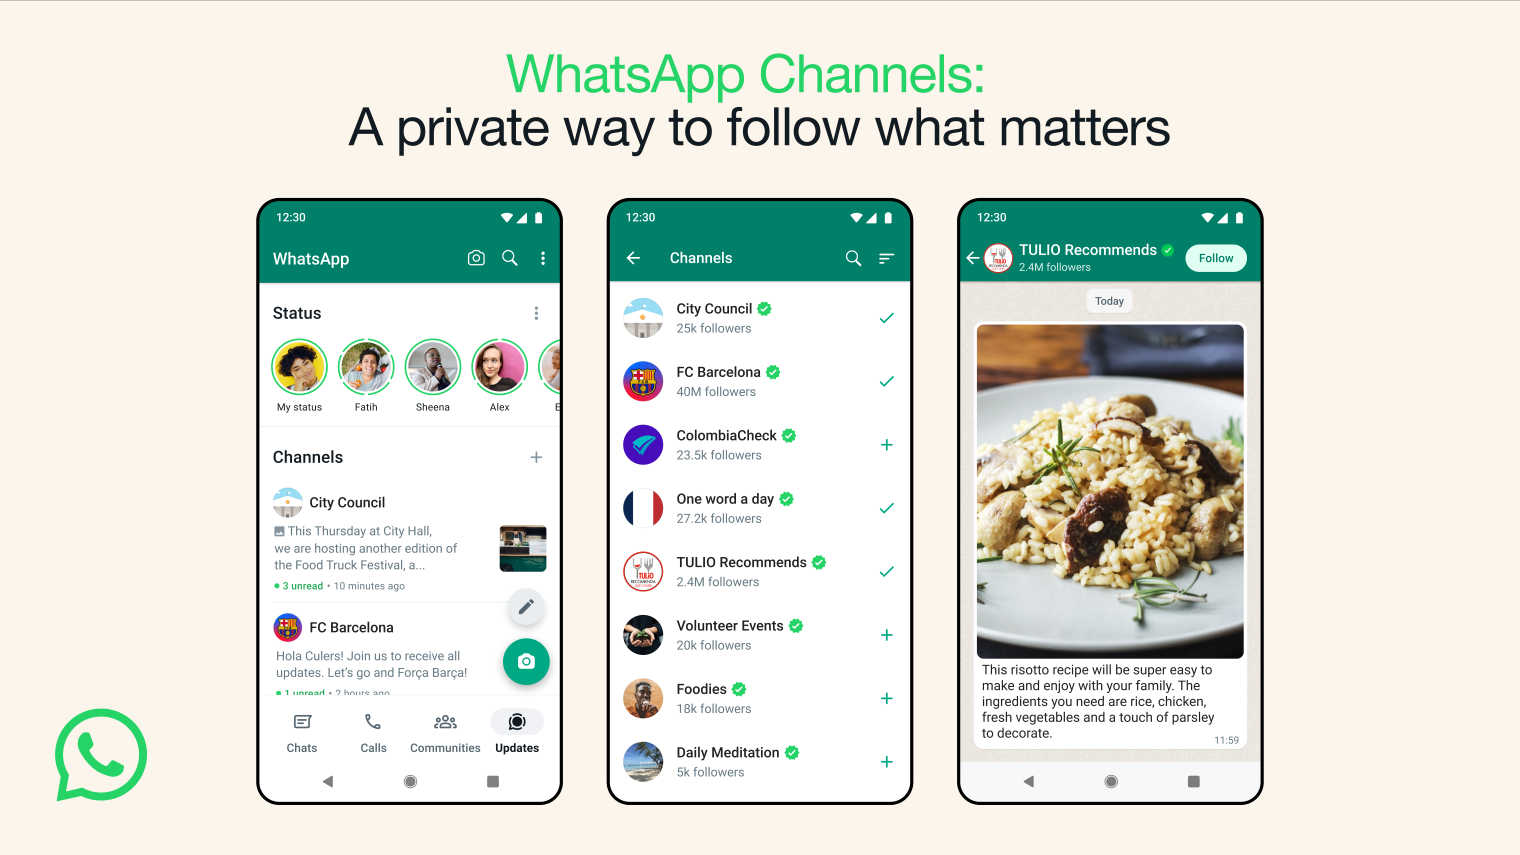 WhatsApp launches Channels - a new private broadcast tool for important updates